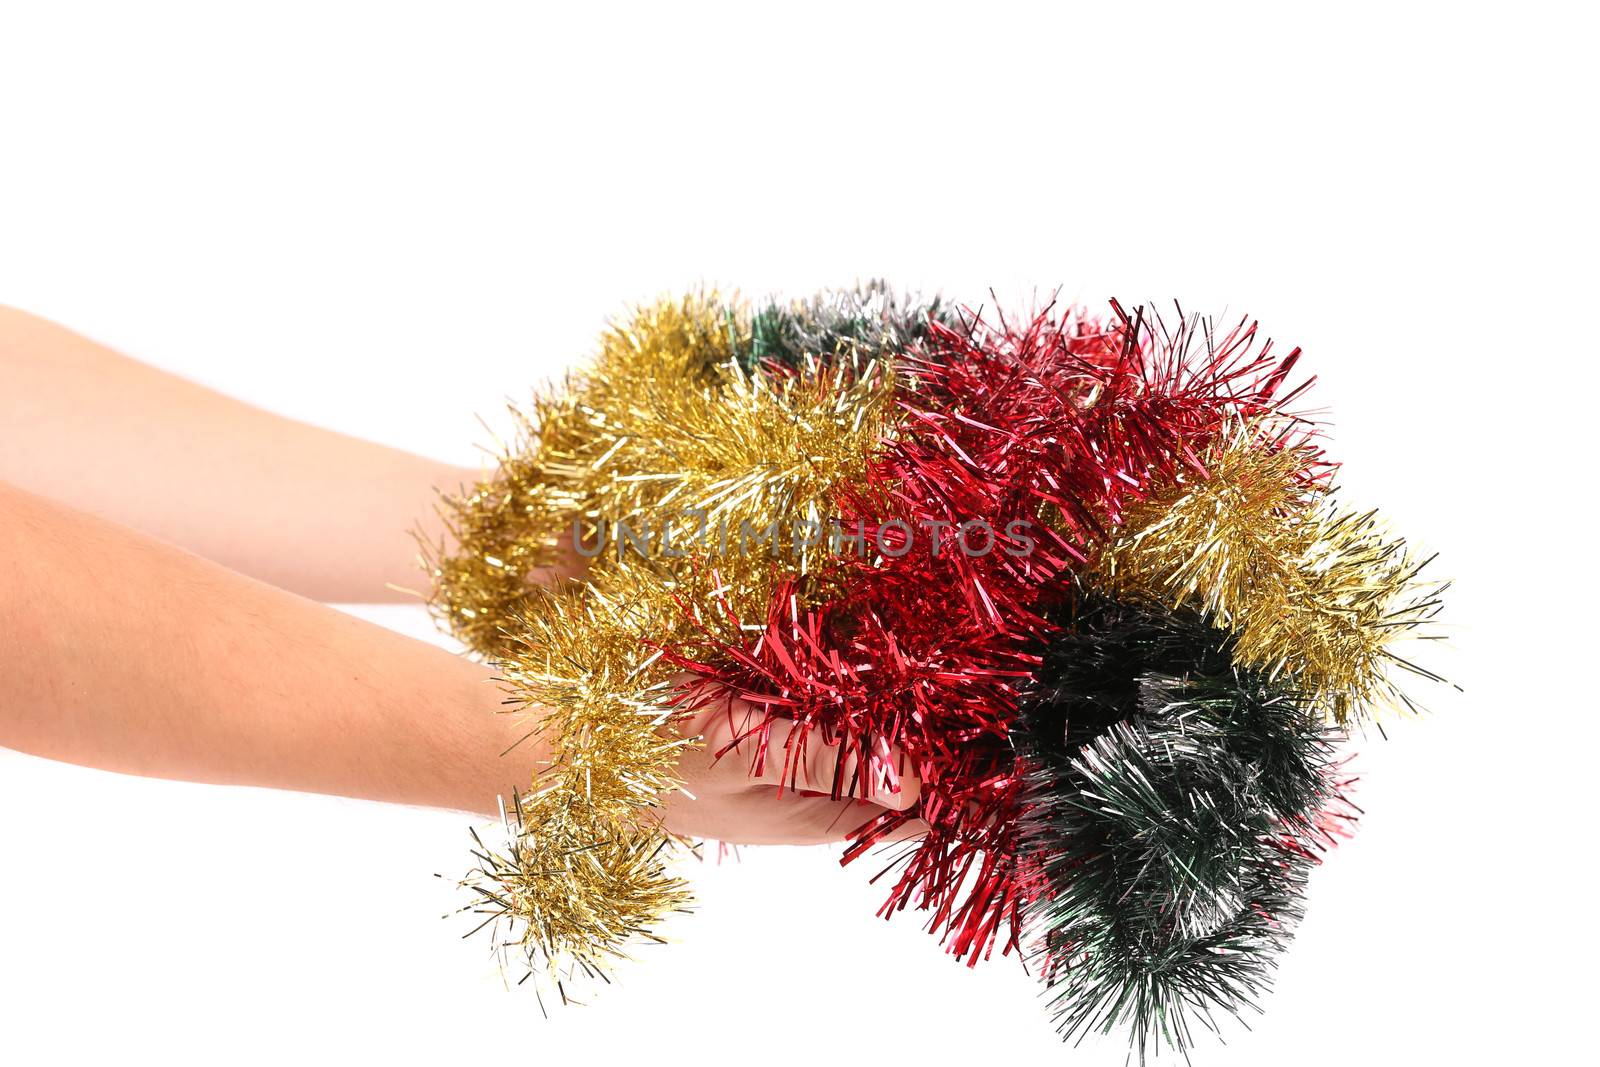 Different color tinsel on hand. Isolated on a white background.